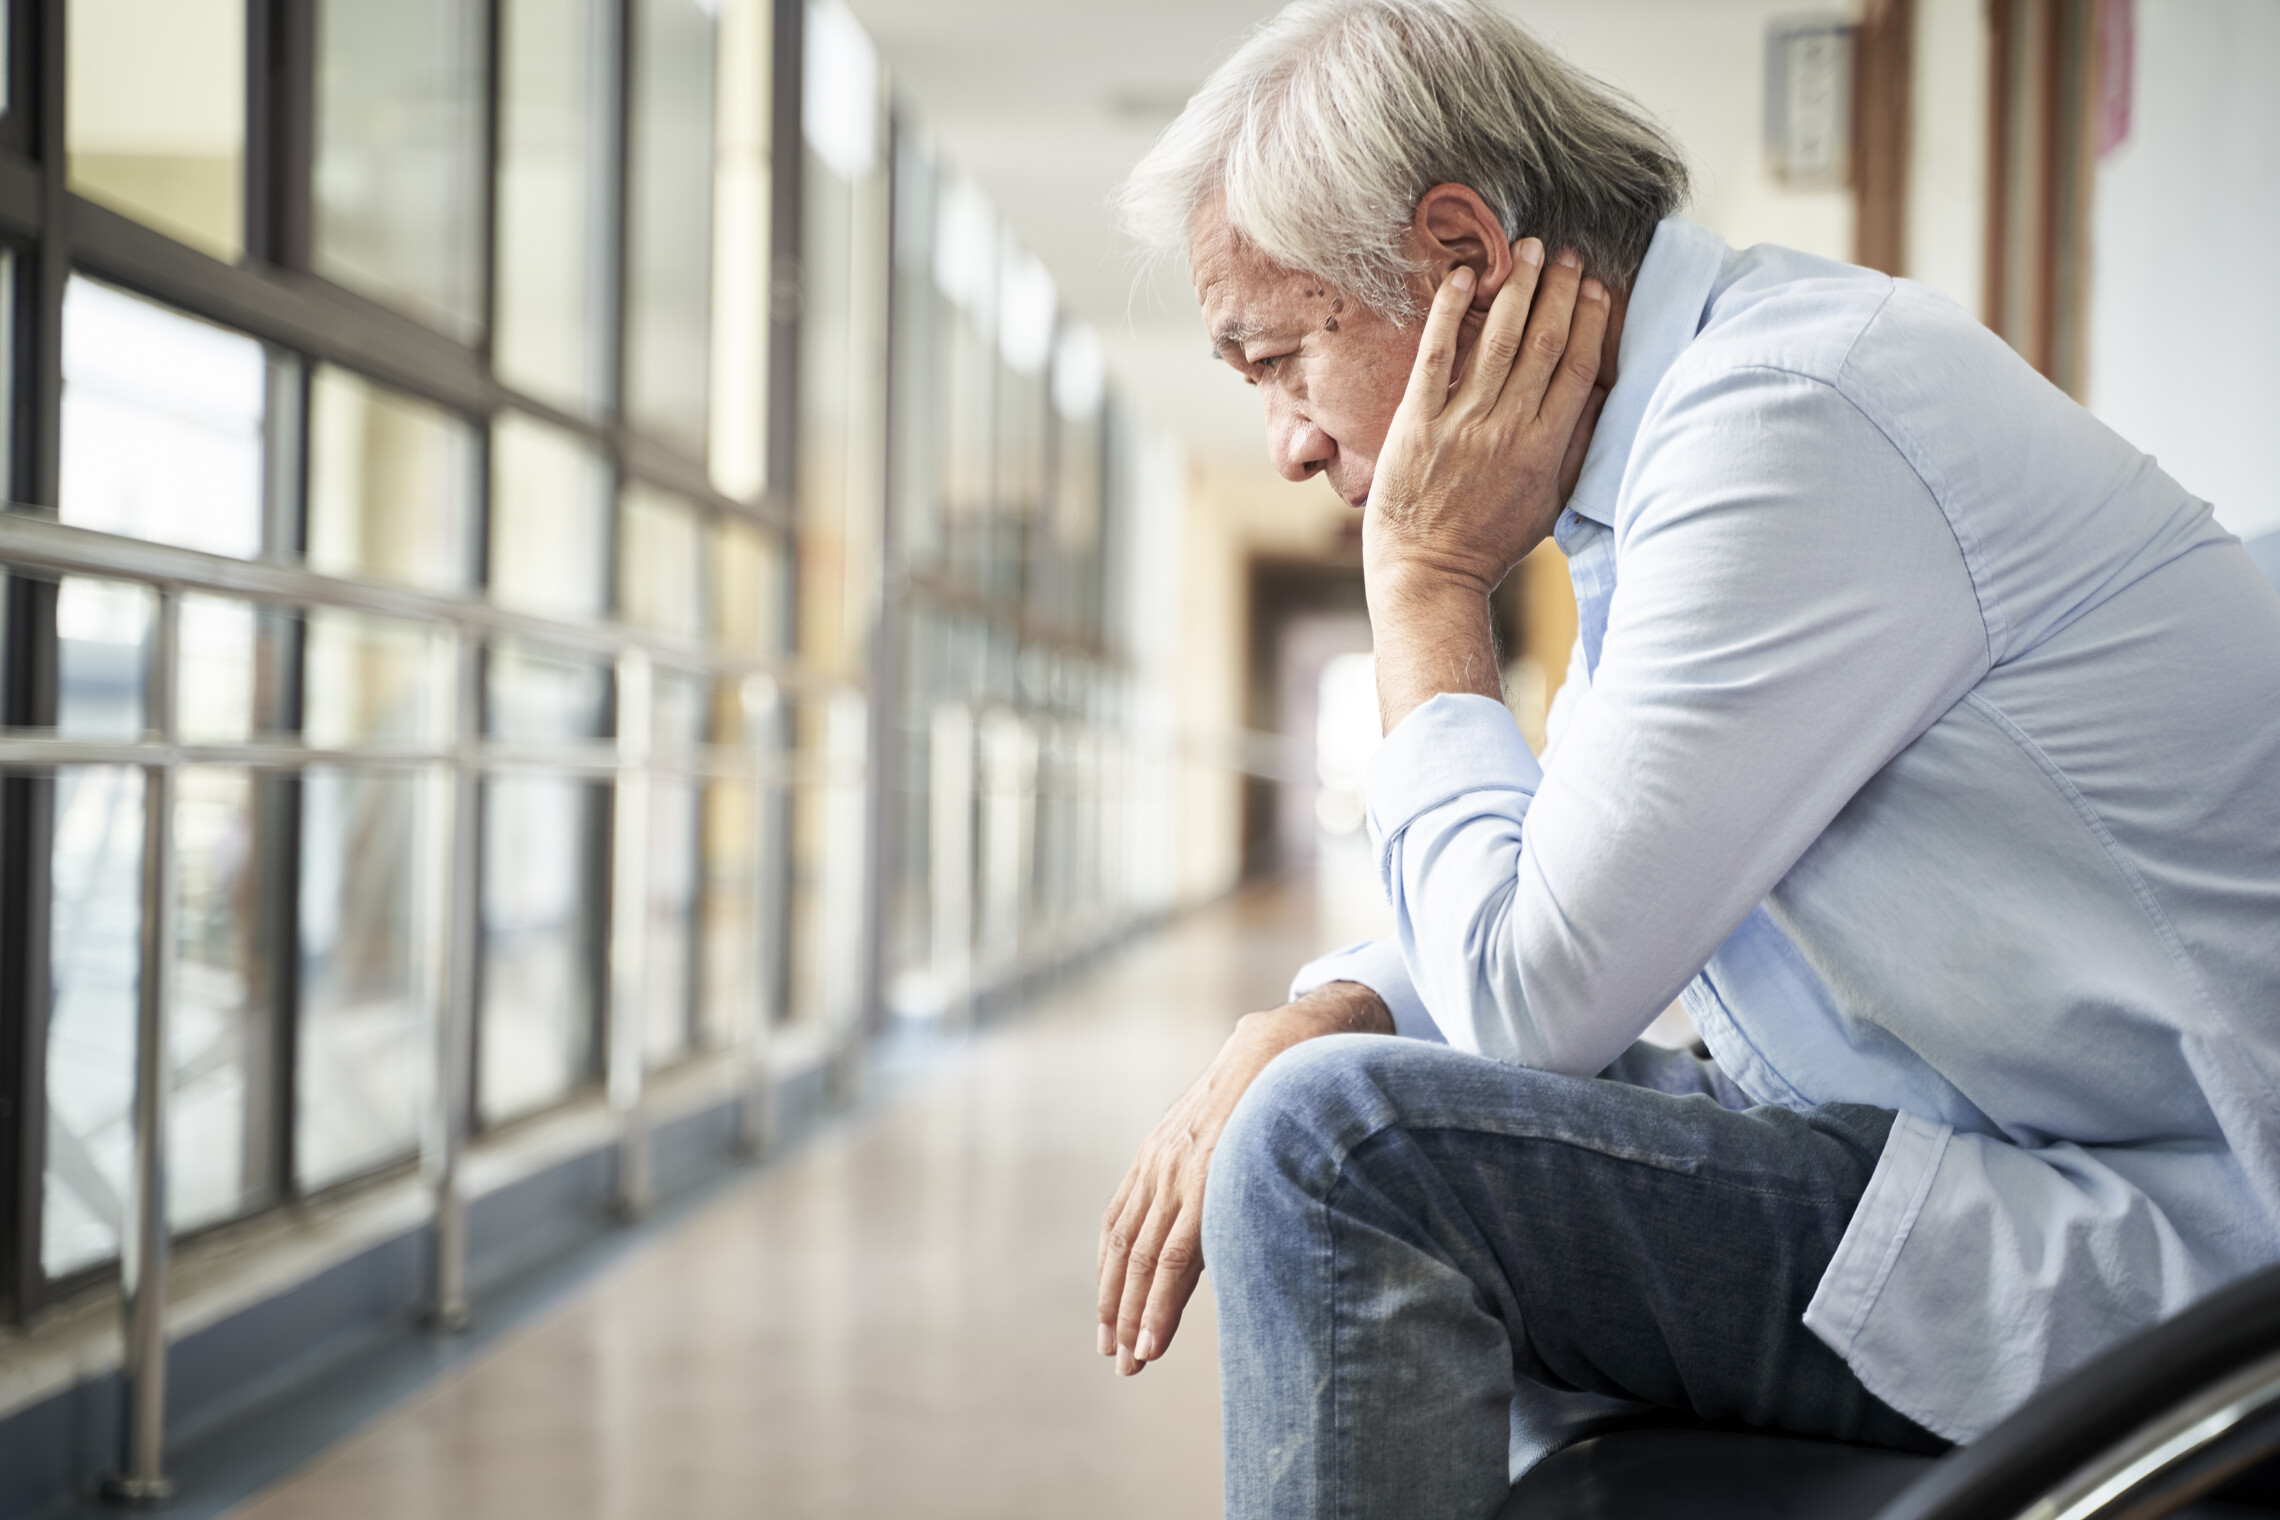 Person sitting in hospital hallway looking sad and depressed